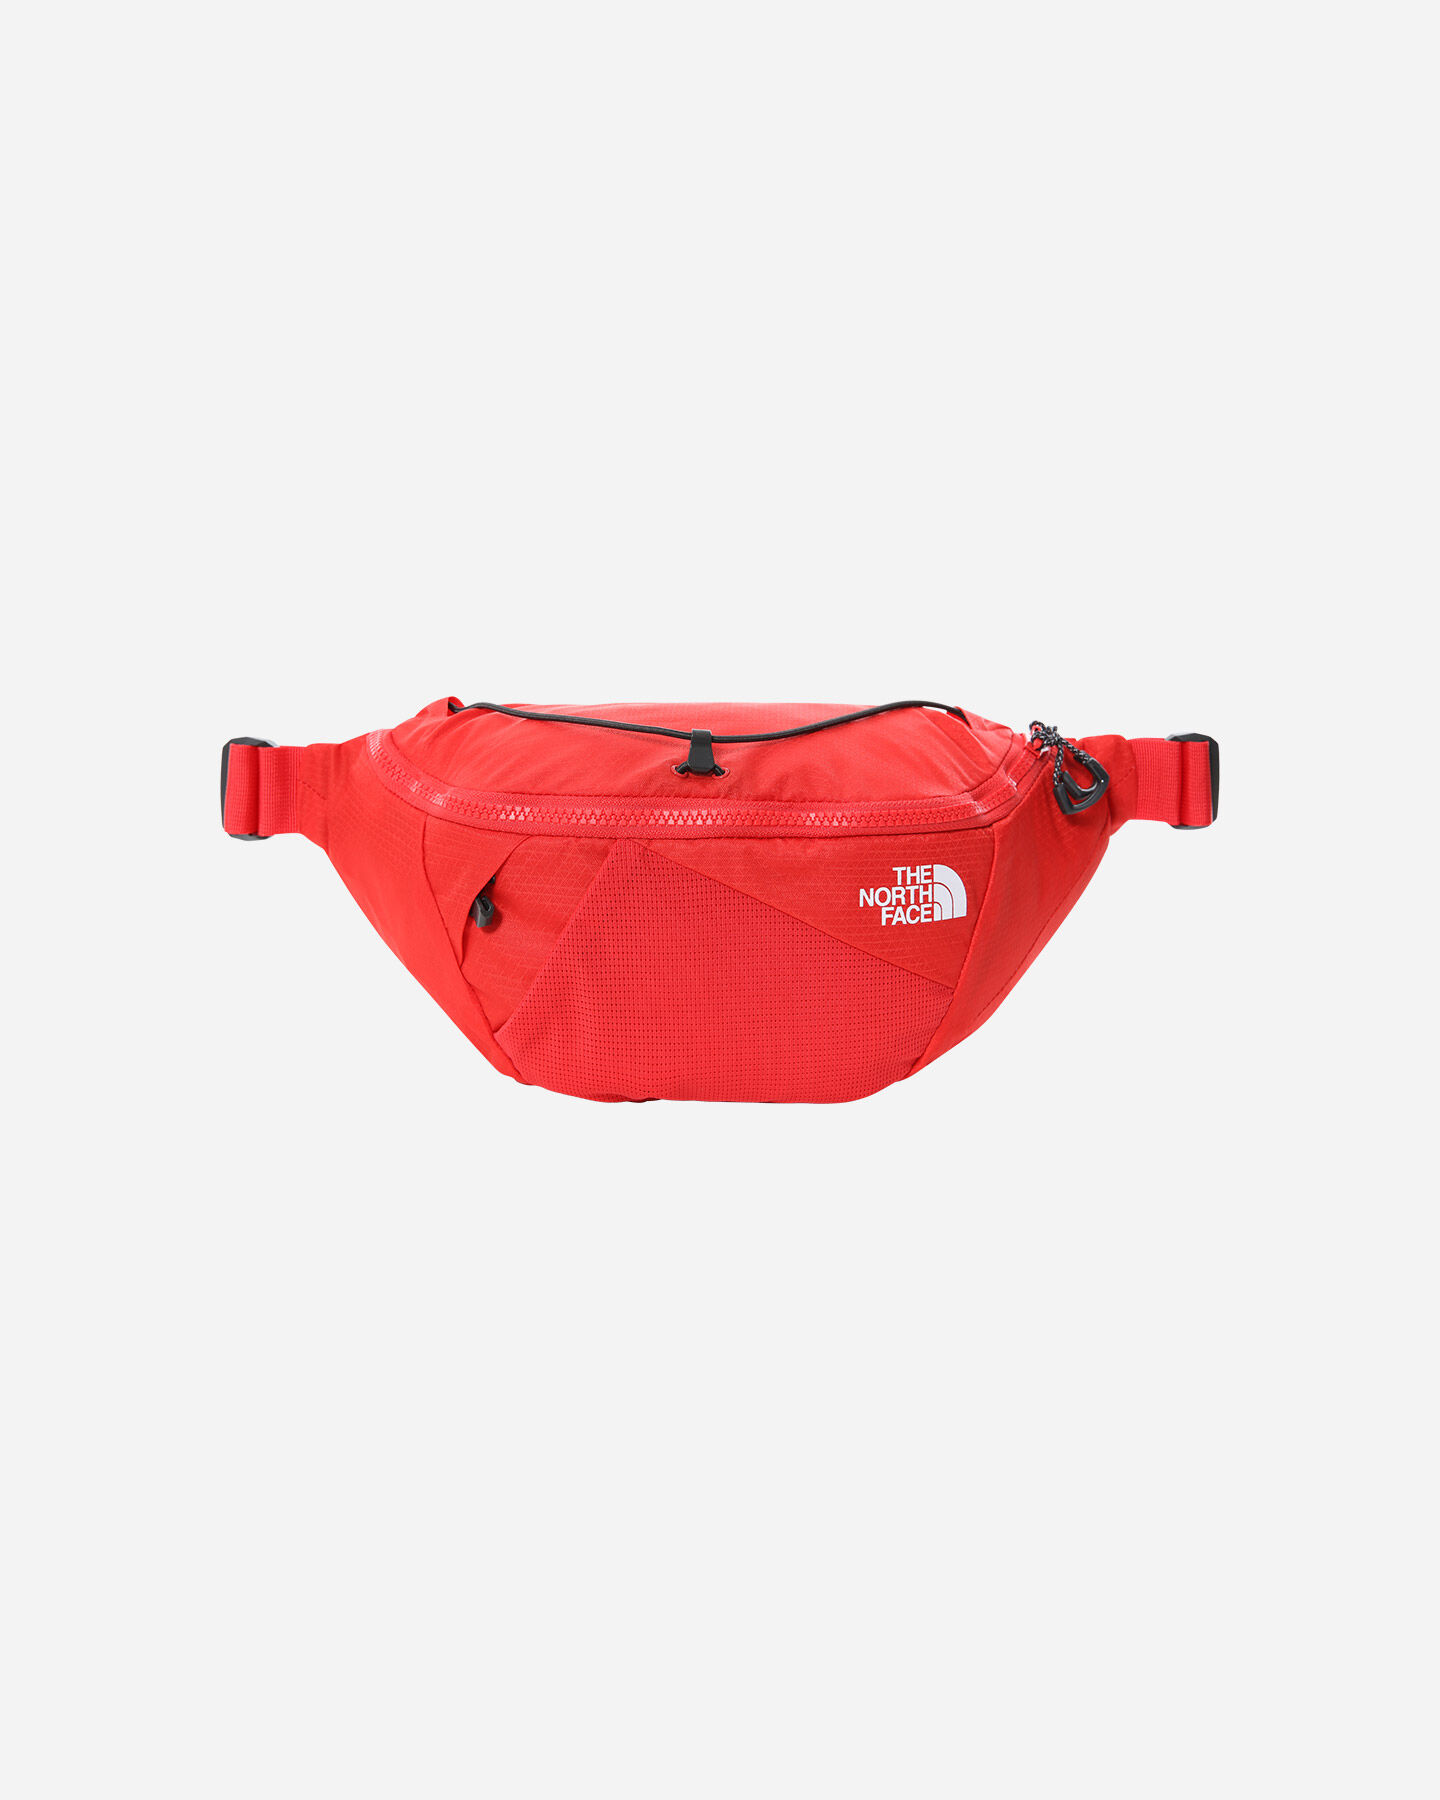  Marsupio THE NORTH FACE LUMBNICAL TG.S S5292500|YTF|OS scatto 0